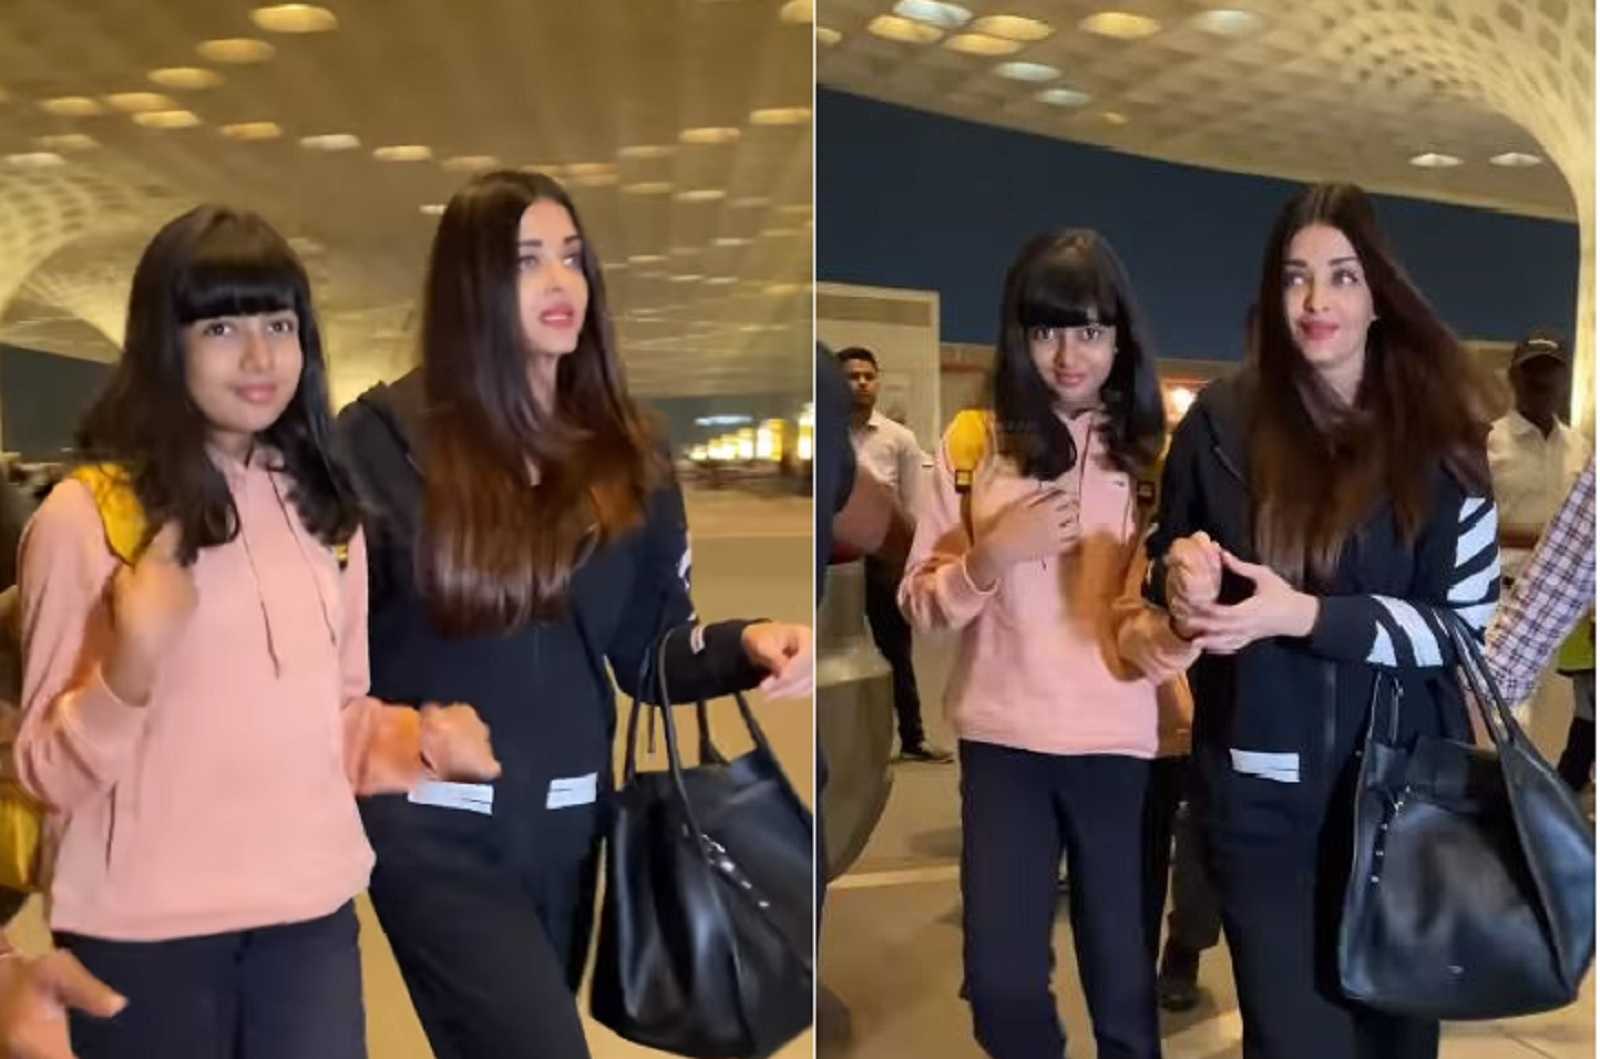 'Can't walk by herself soo low confident kid': Aishwarya Rai keeps daughter Aaradhya Bachchan close as paparazzi trail them at the airport